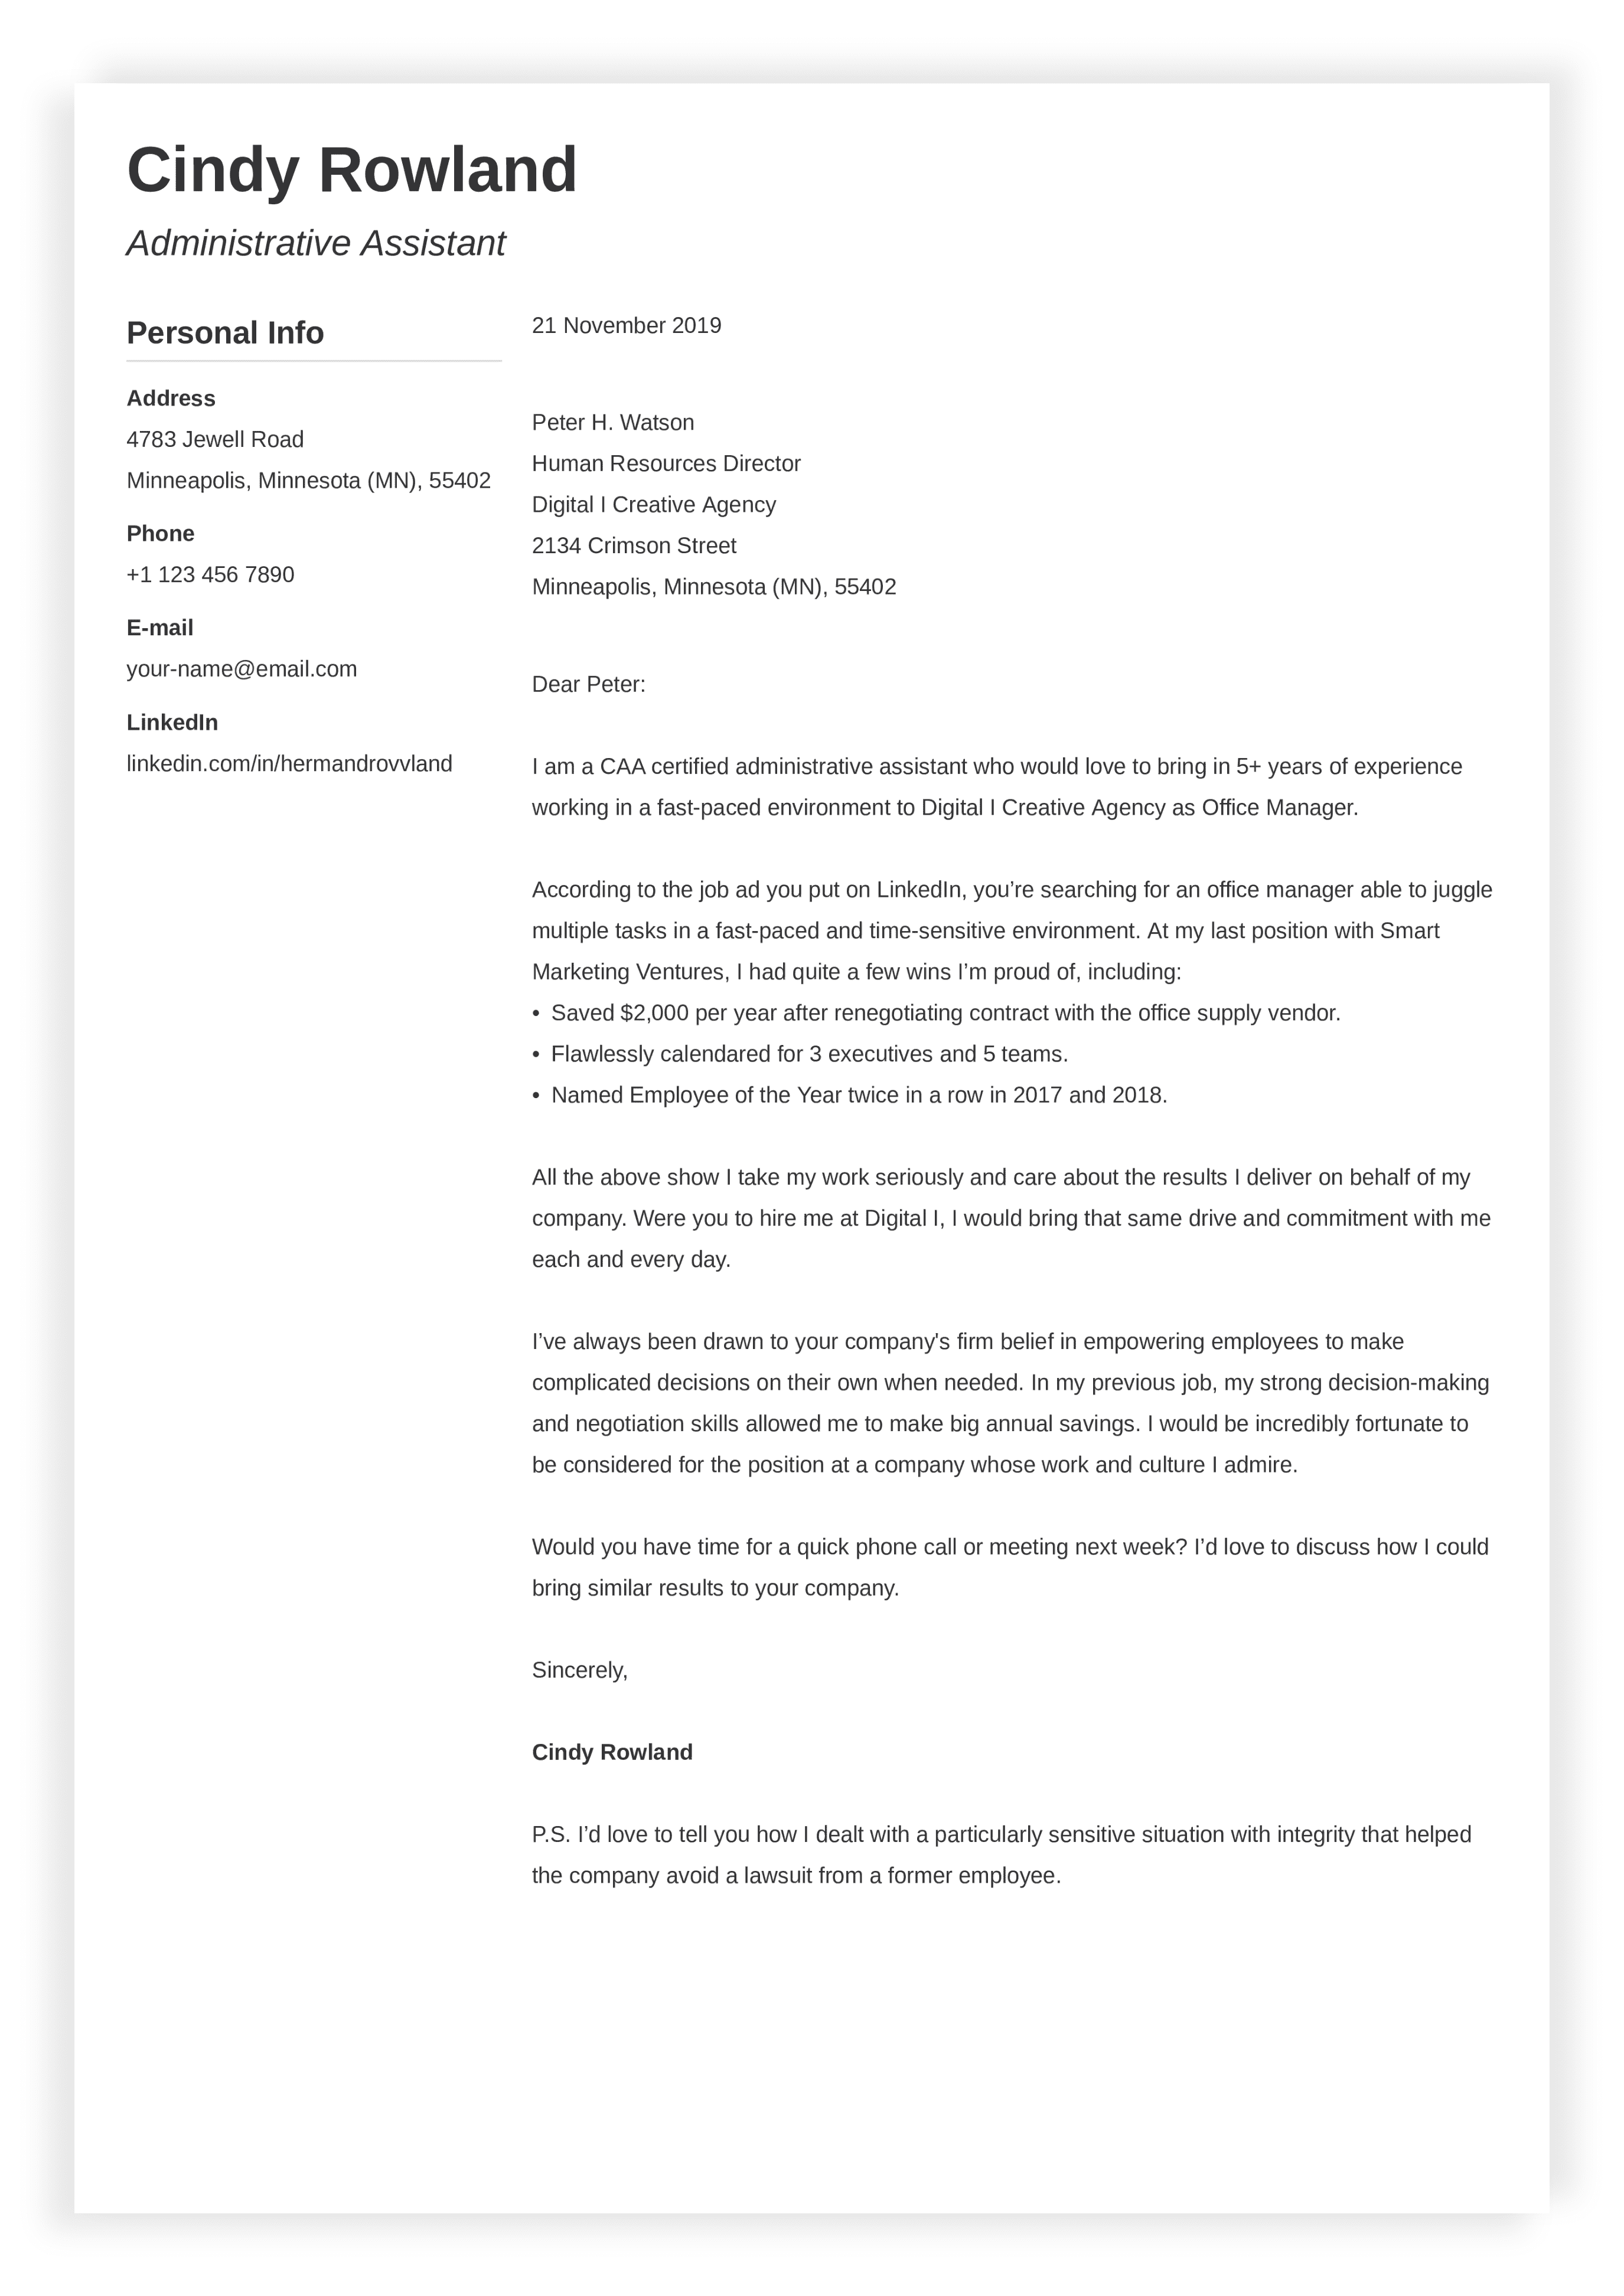 How to Write a Cover Letter for a Job in 2020 (12+ Examples)